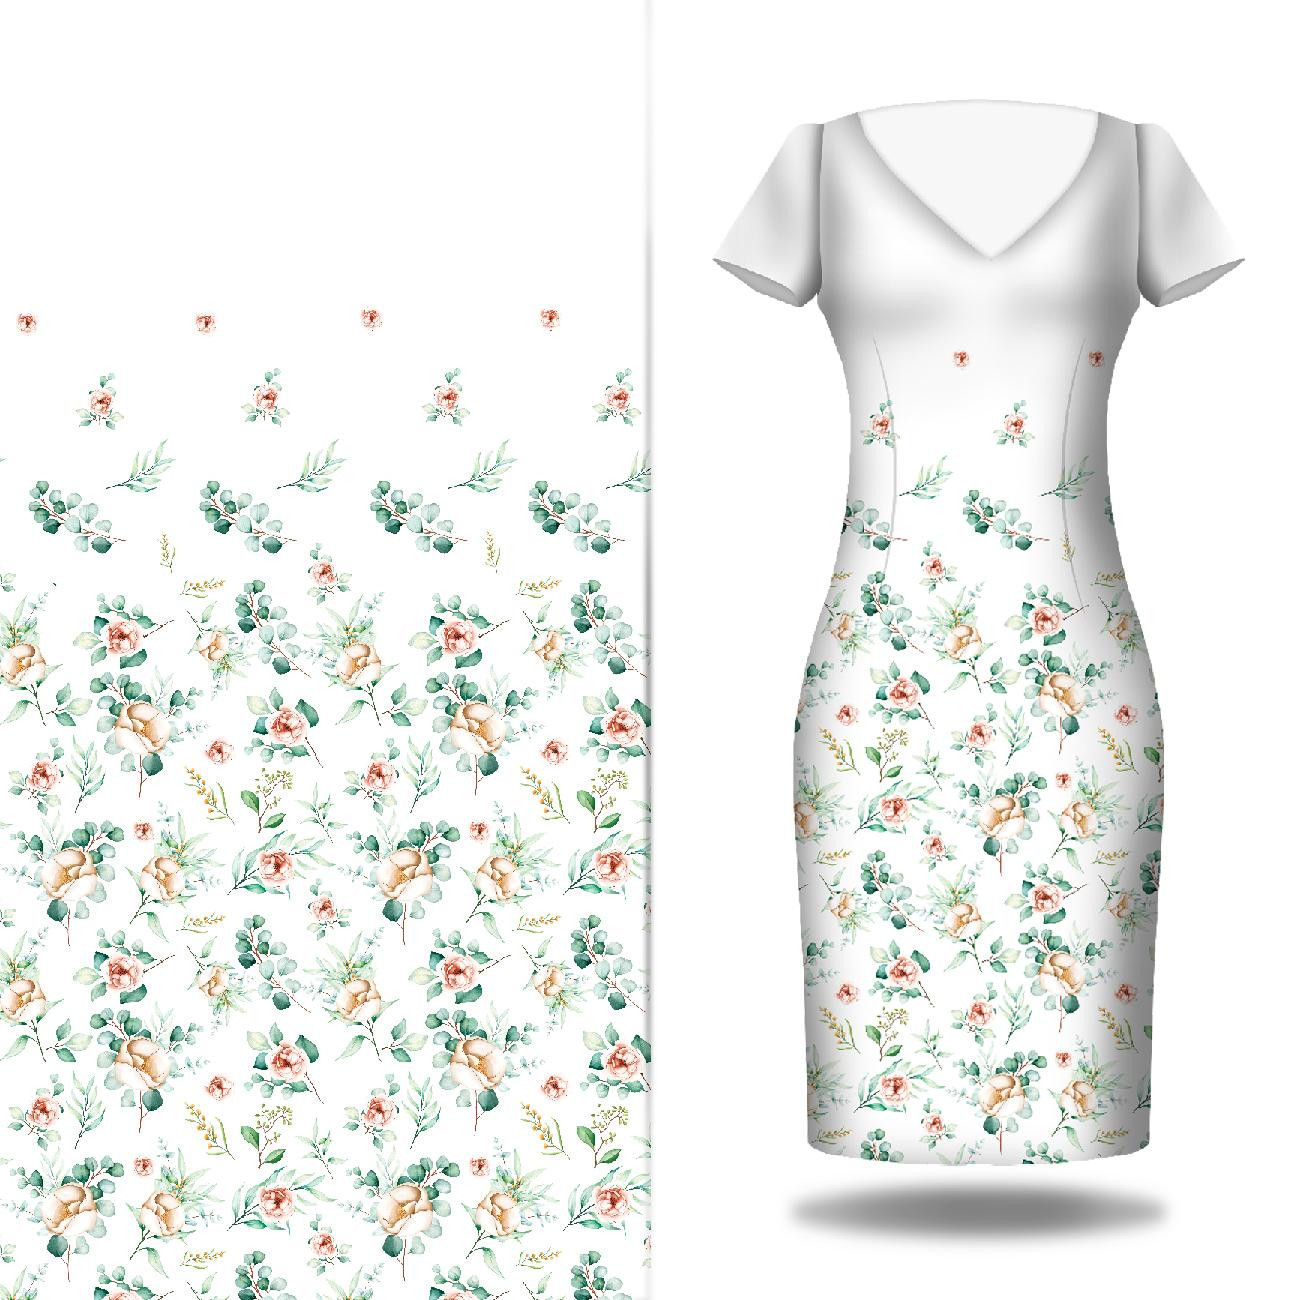 ROSES AND LEAVES PAT. 2 - dress panel 